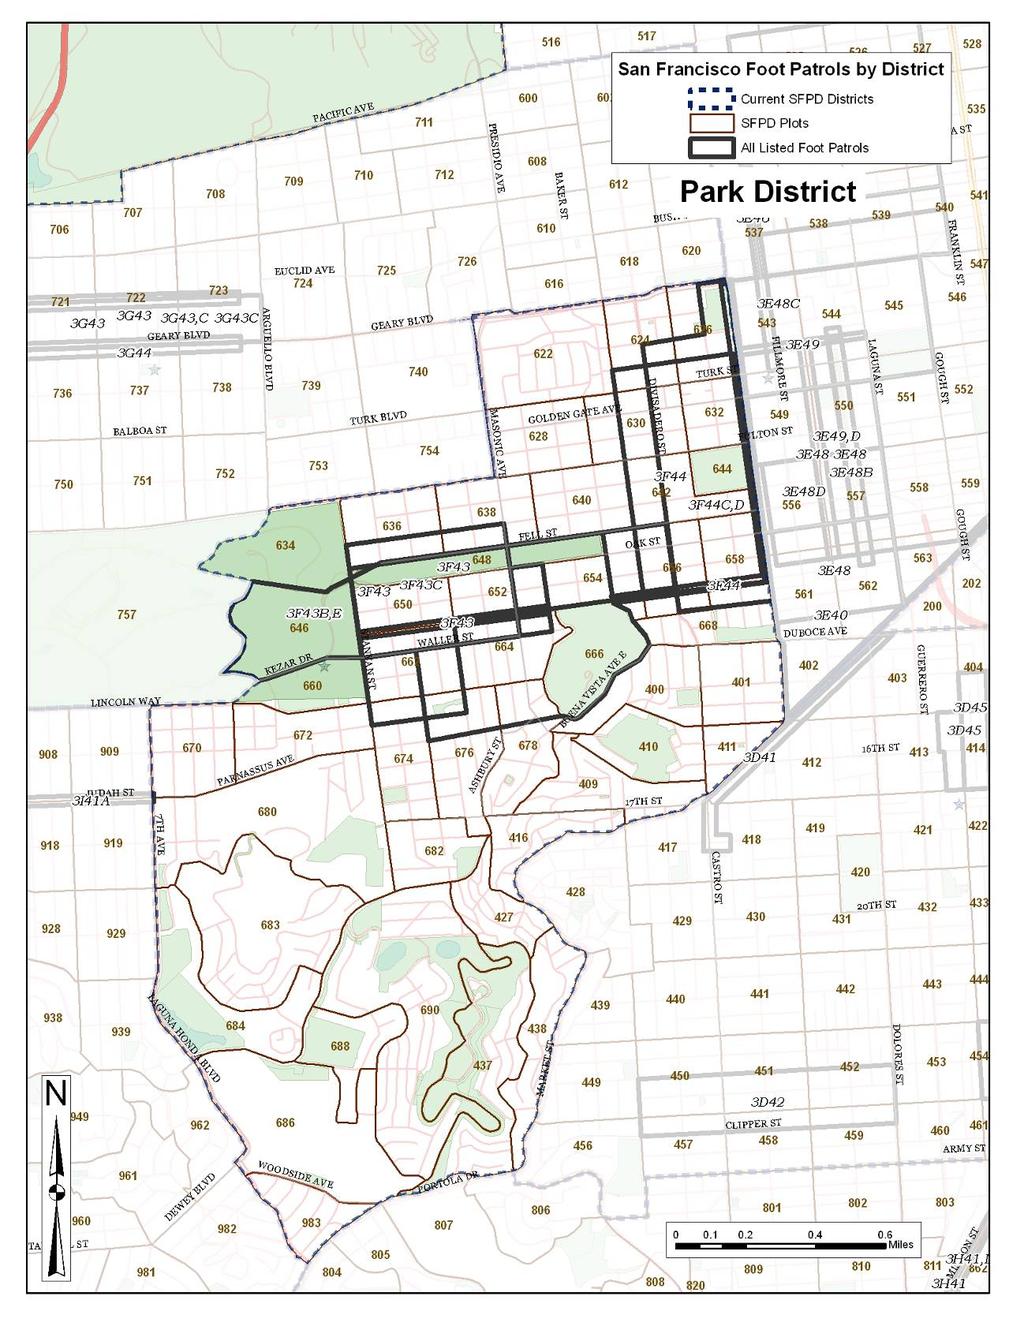 Map 15: Park District Beats 61 Source: PSSG based on SFPD shape files and records